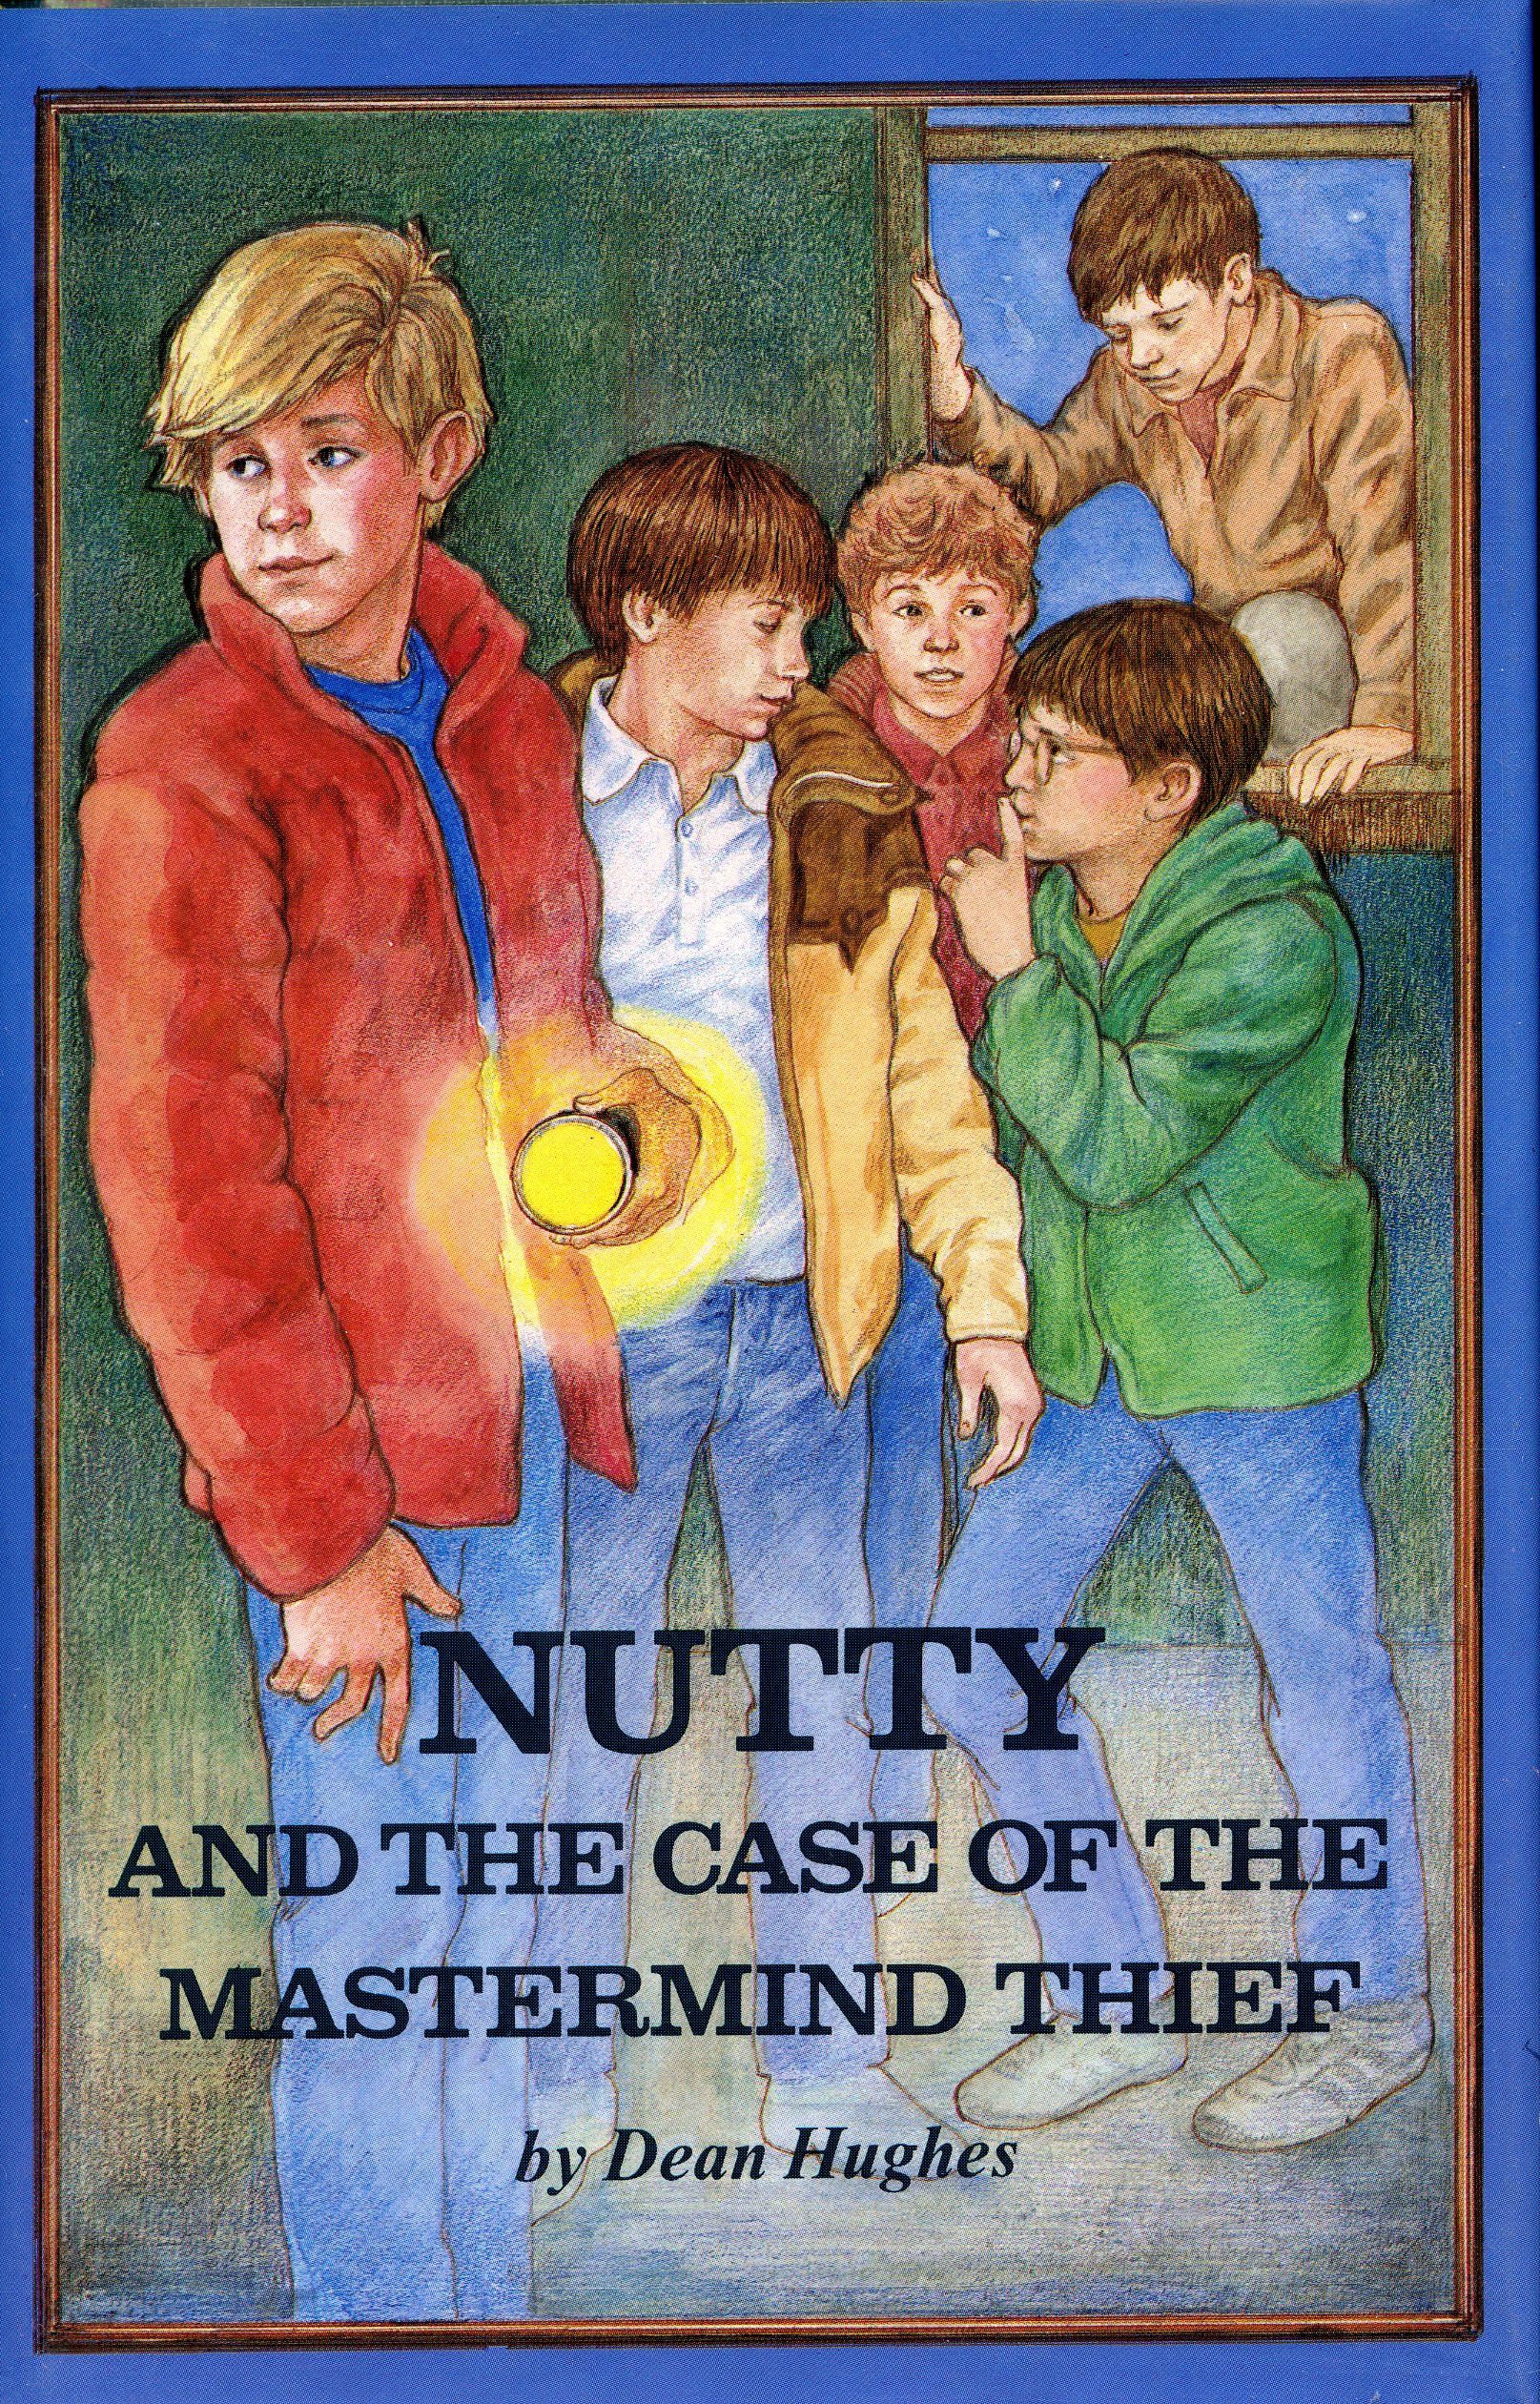 Nutty and the Case of the Mastermind Thief by Dean Hughes